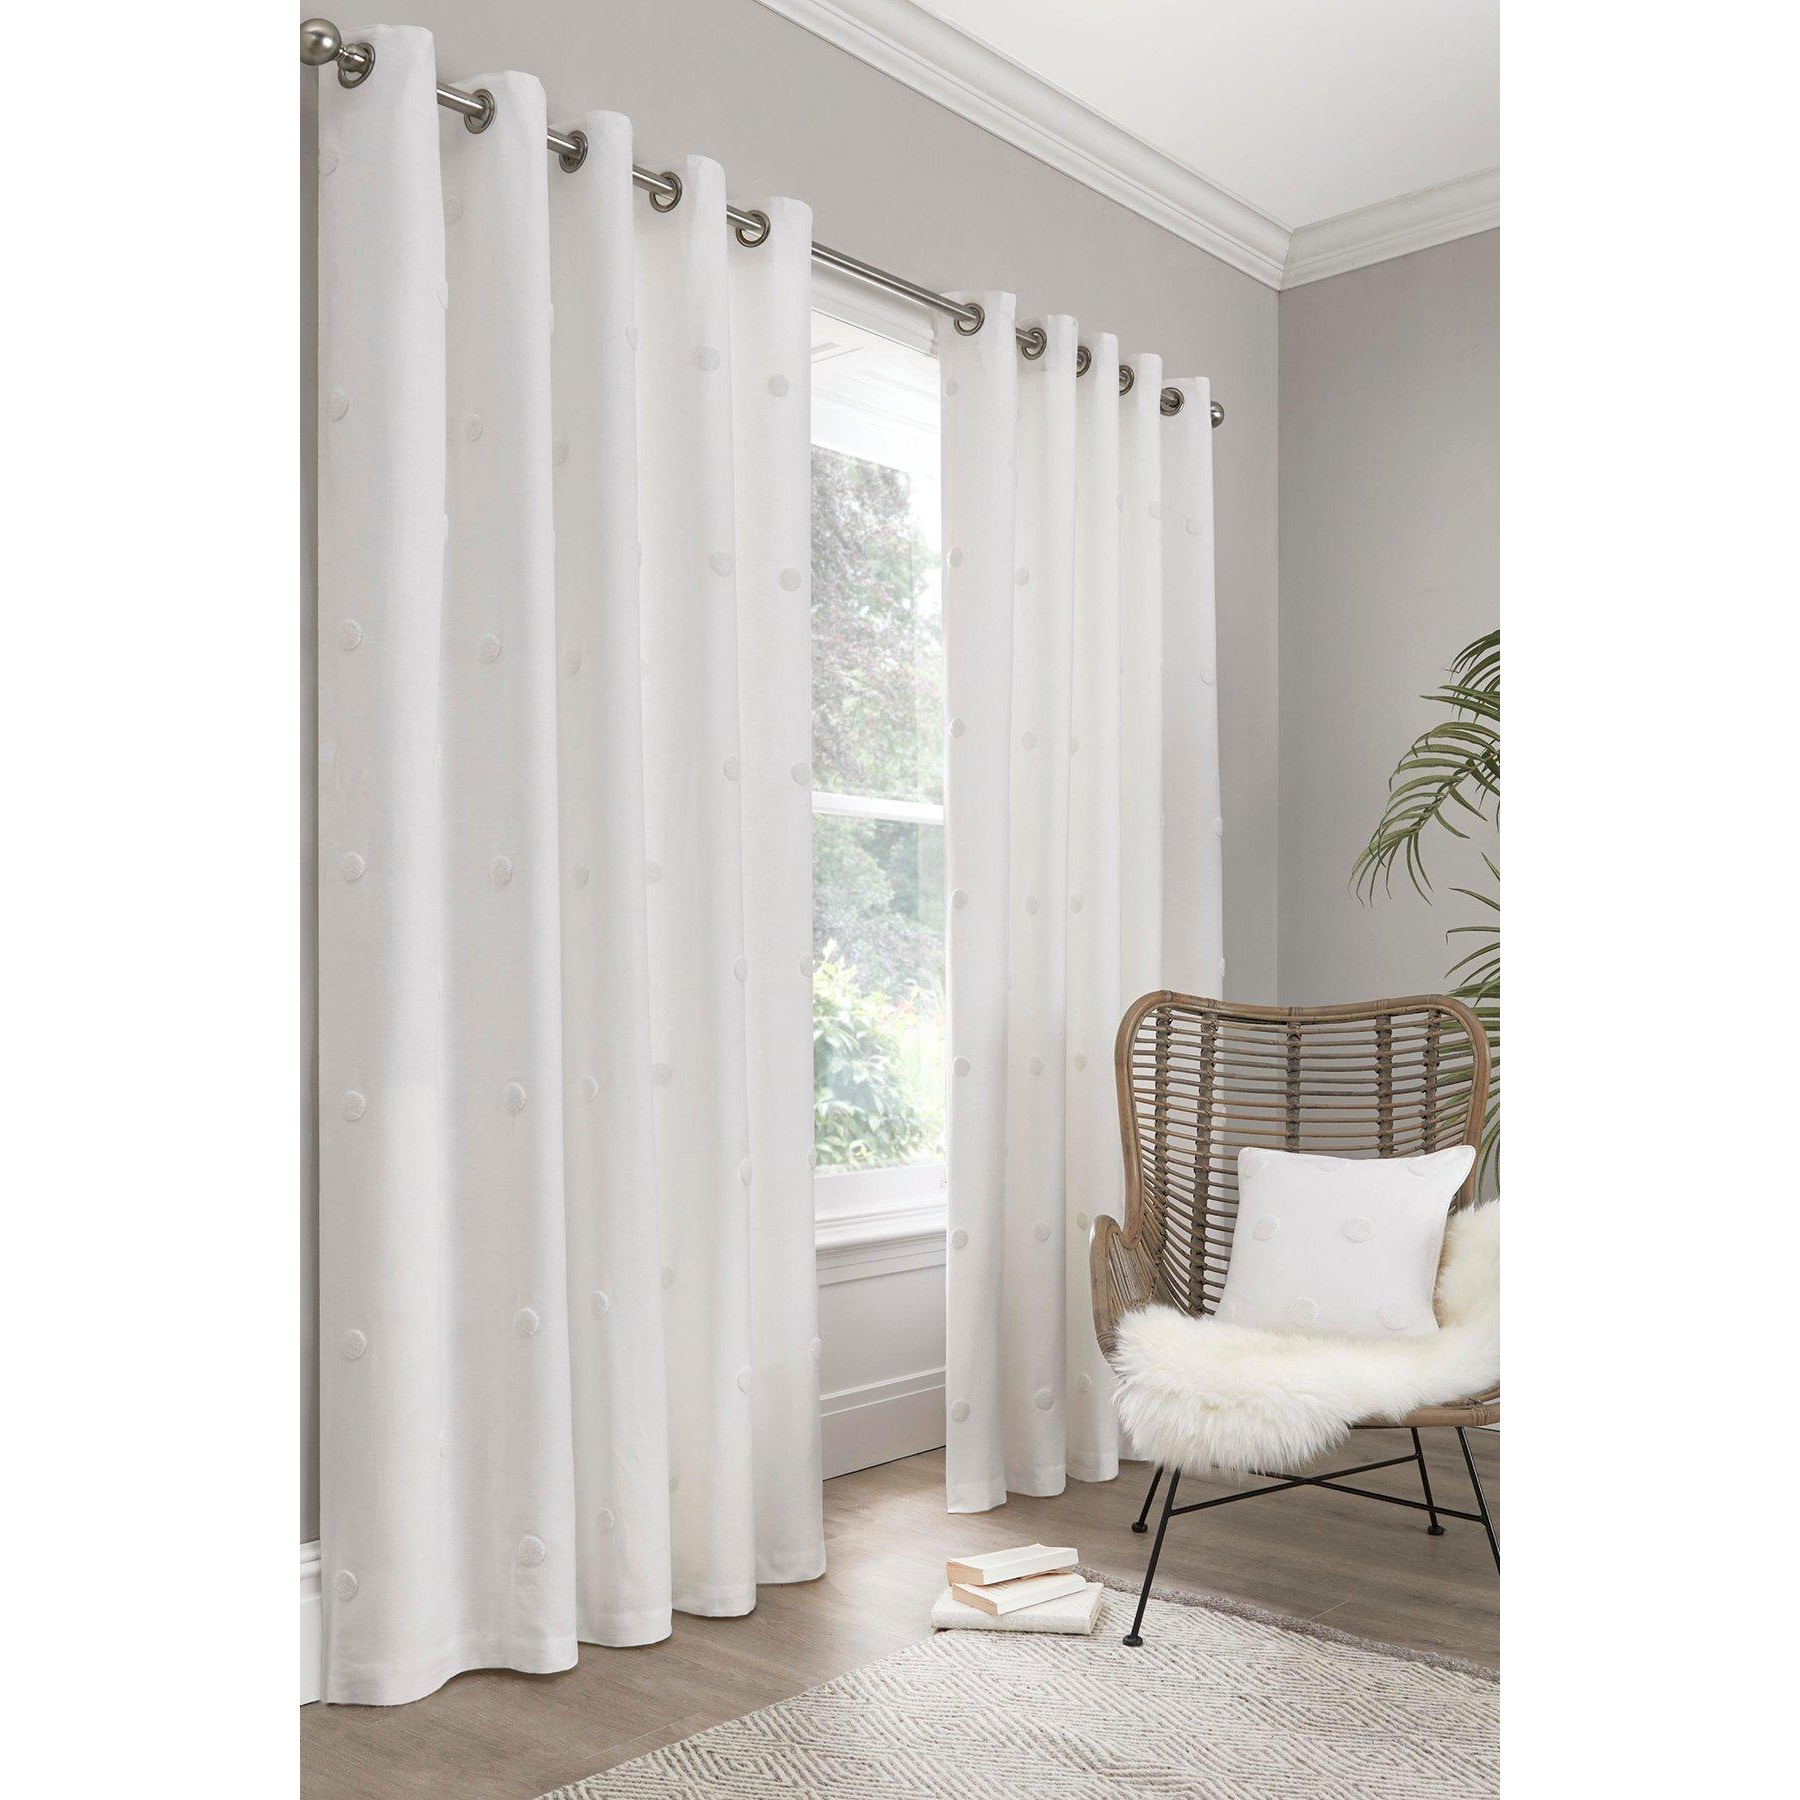 'Polka Dot' Lined 100% Cotton Pair of Eyelet Curtains - image 1